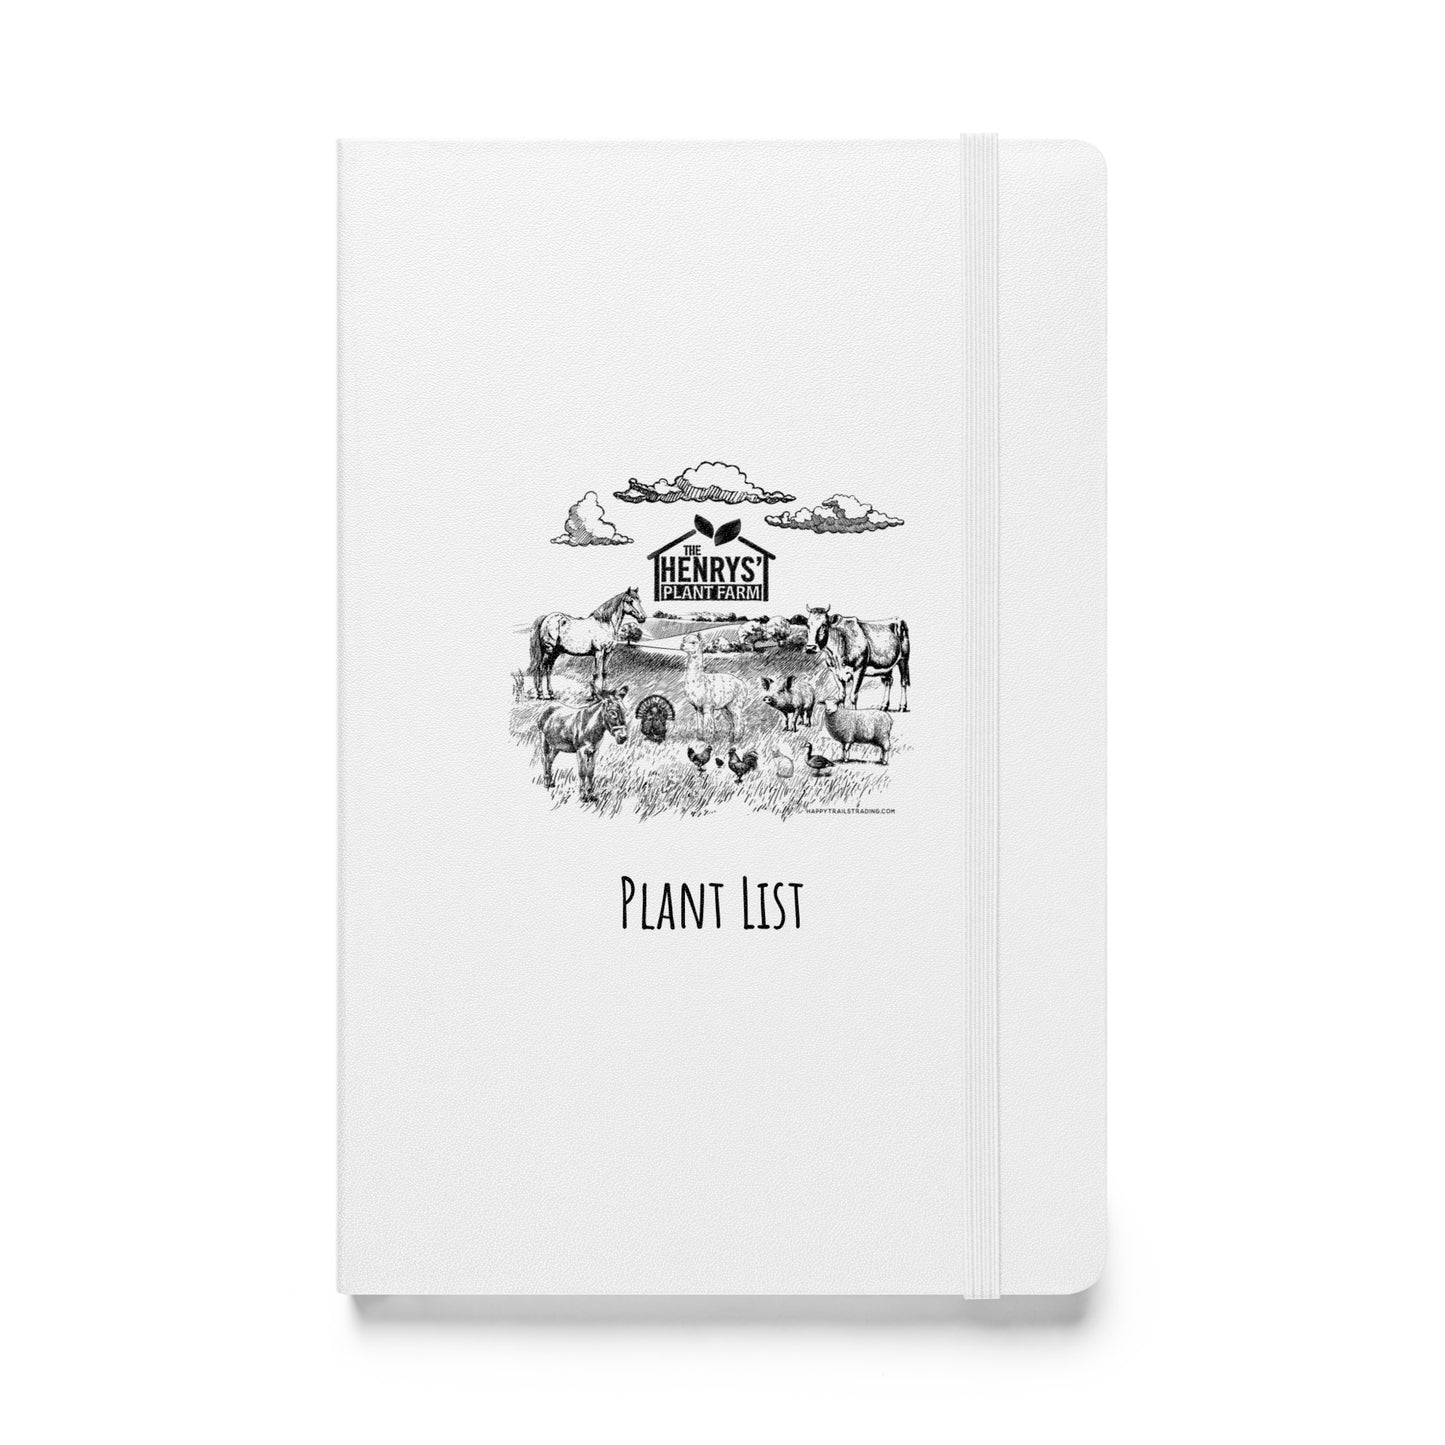 The Henrys' Plant Farm - Plant List Hardcover Bound Notebook